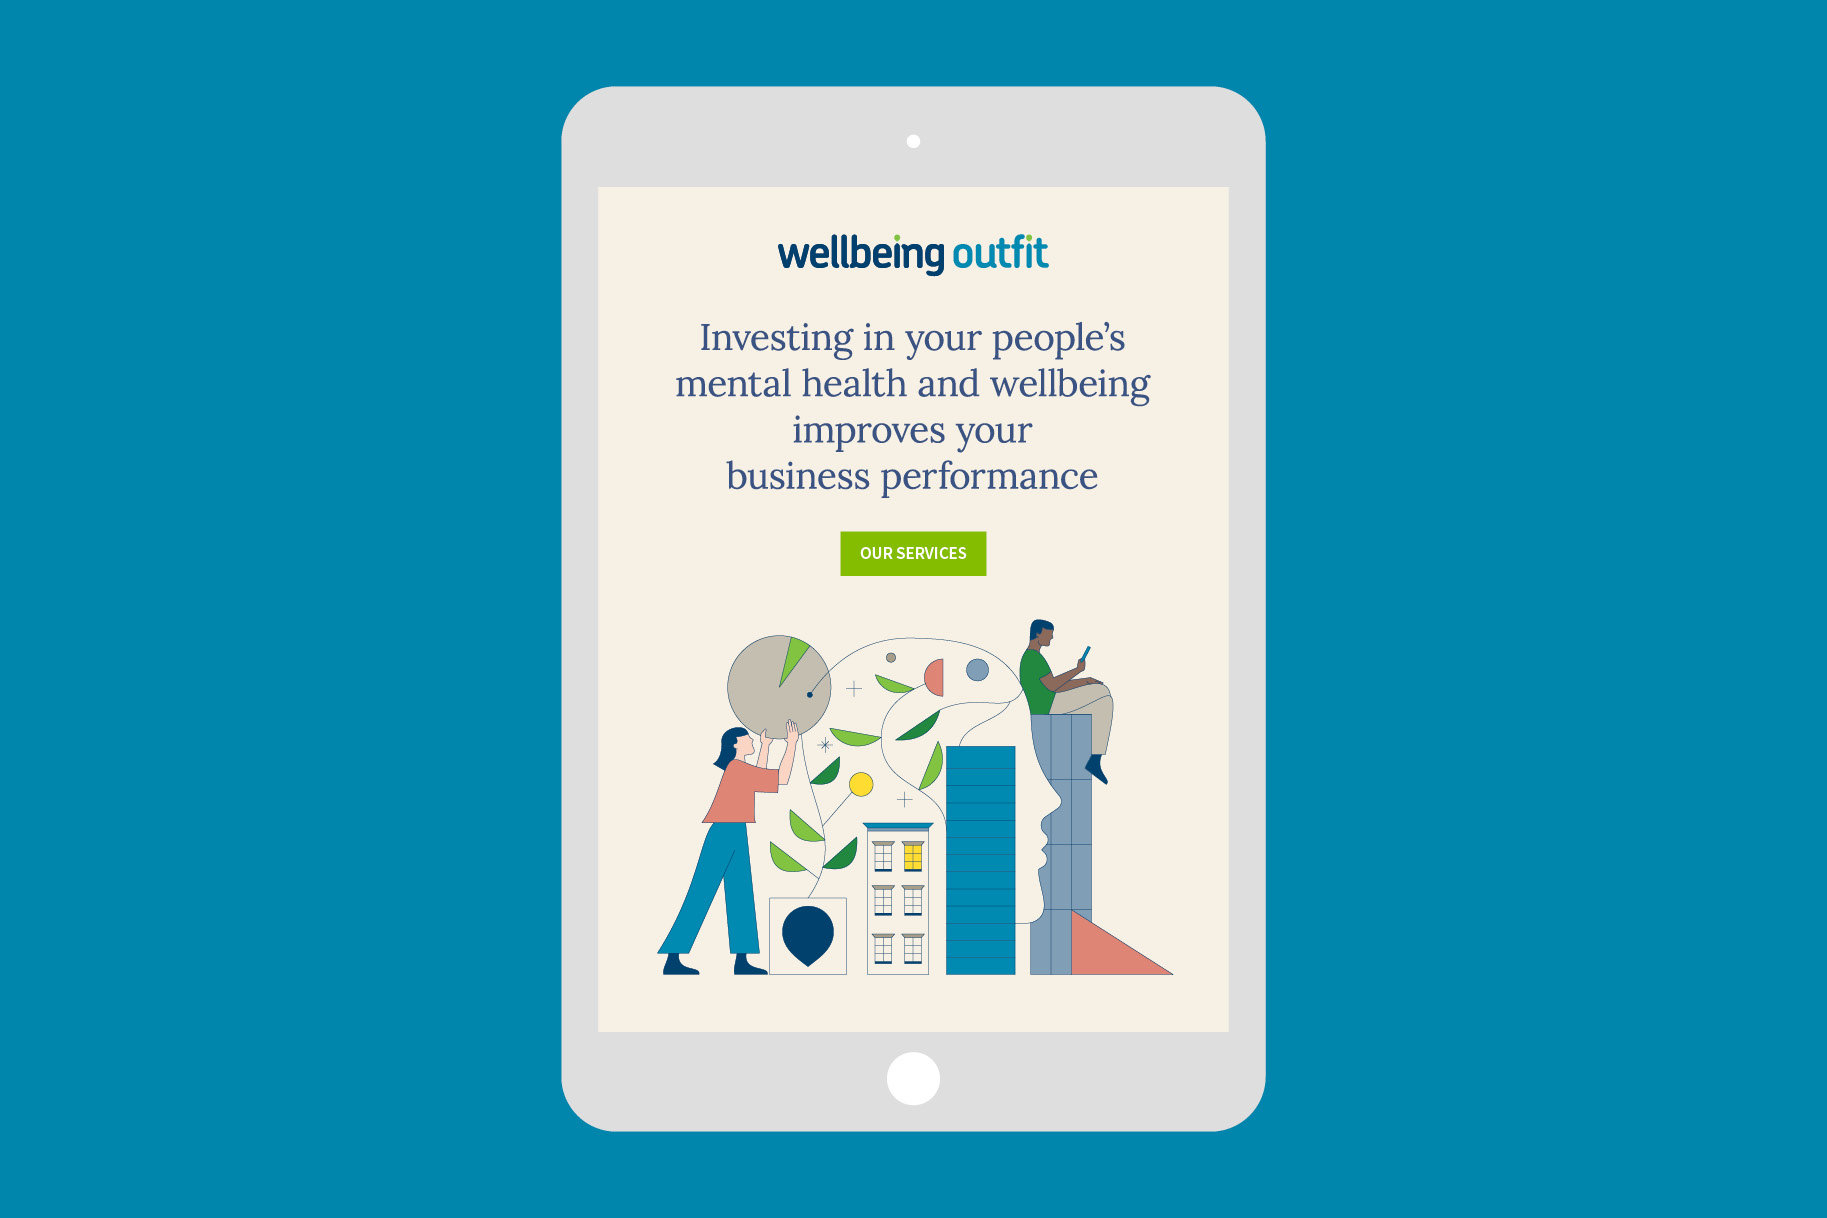 Wellbeing Outfit homepage